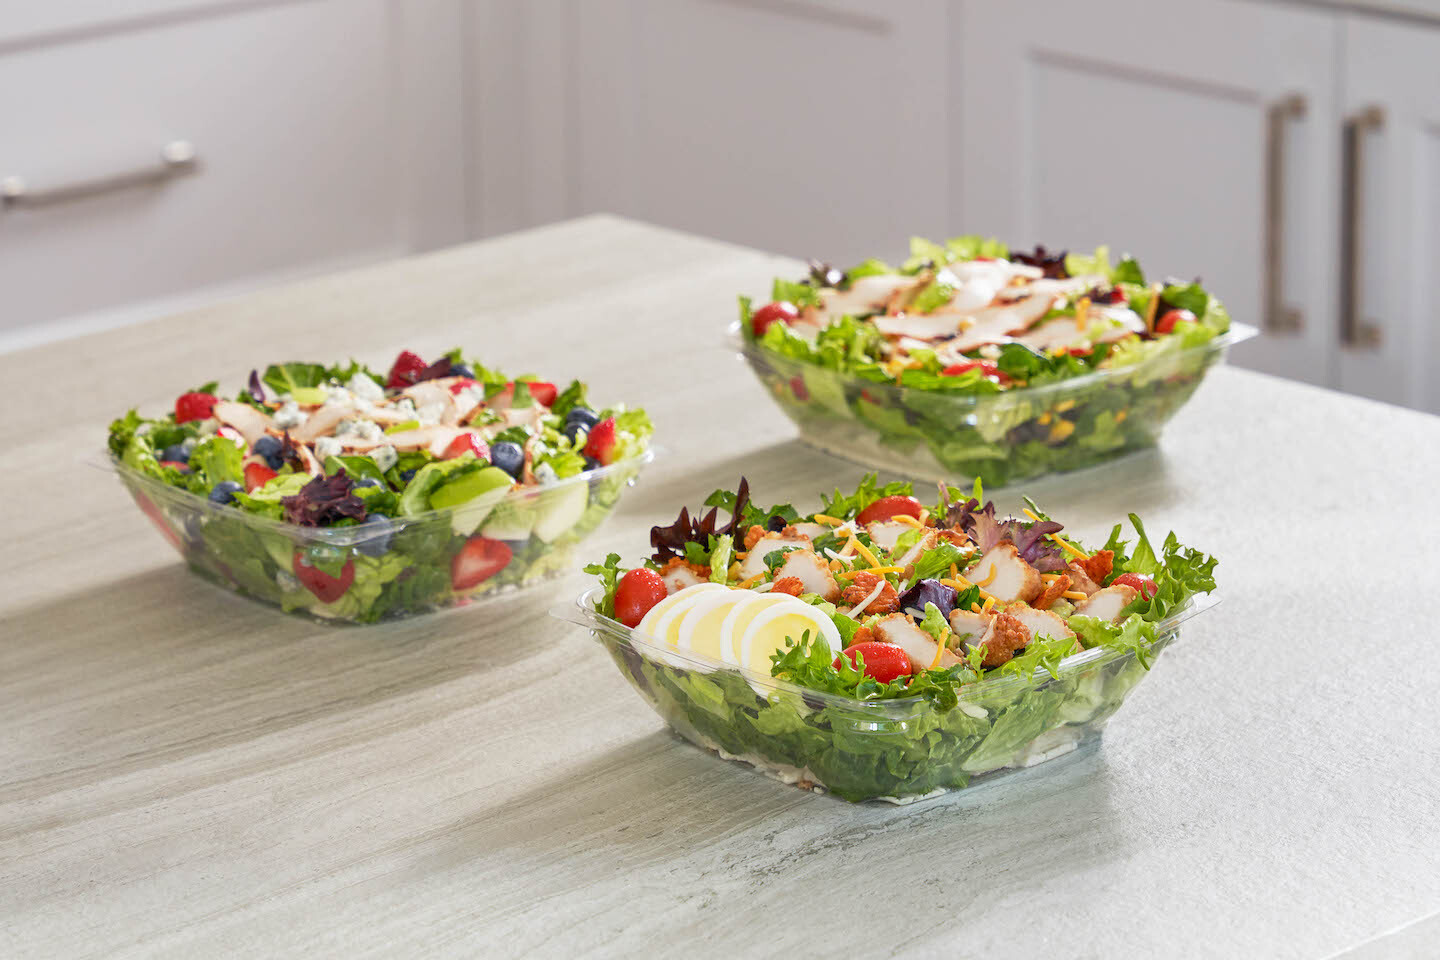 Chick-fil-A offers various kinds of salads in a bid to keep up with evolving consumer preferences